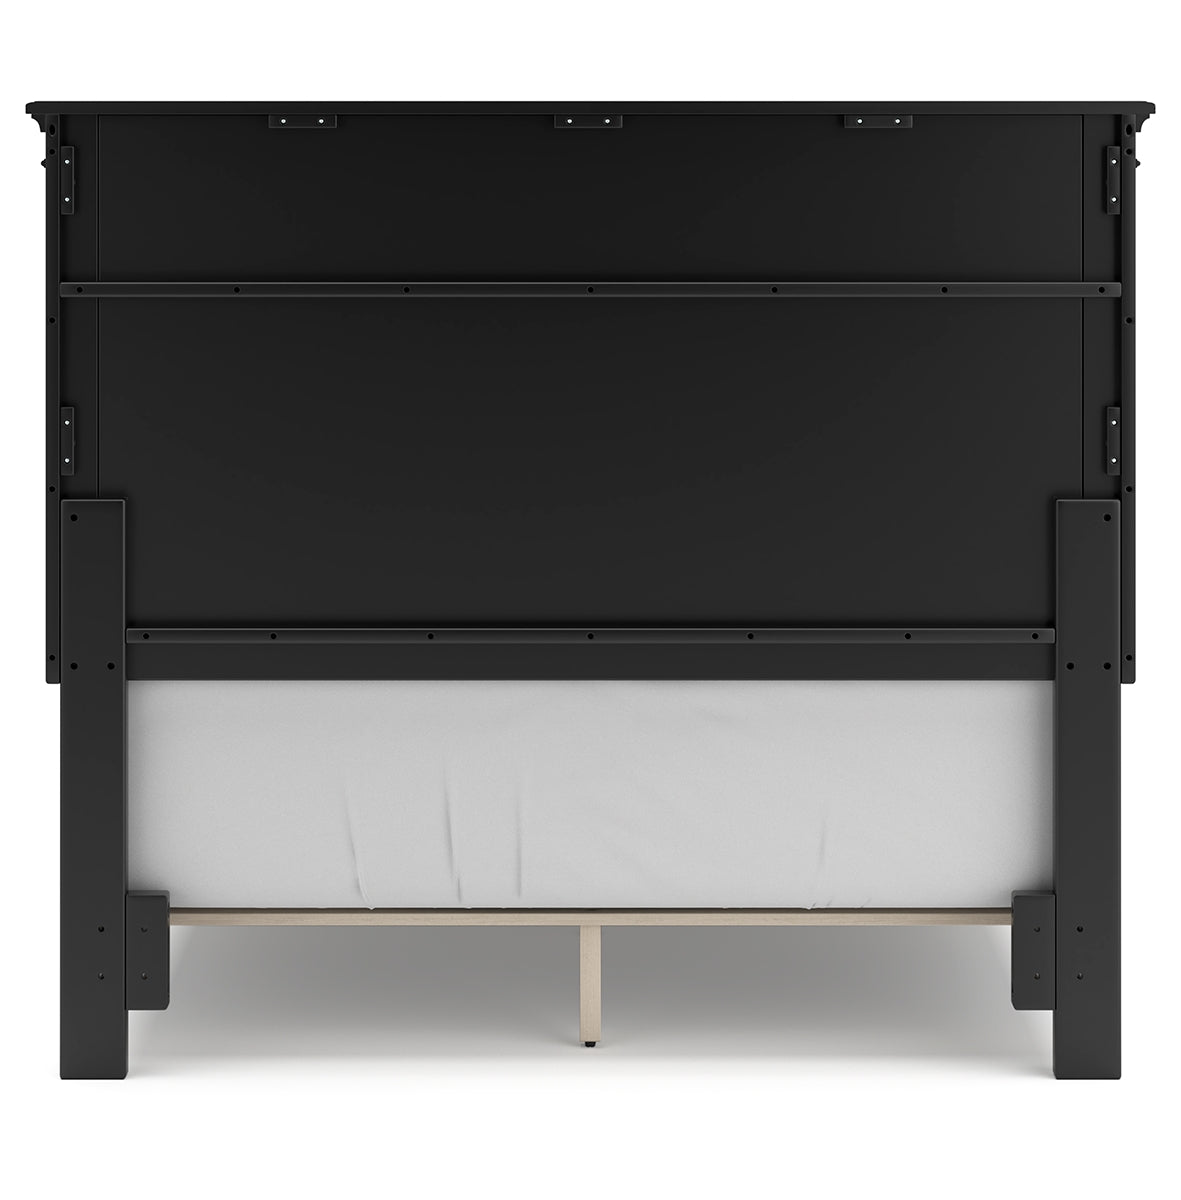 Lanolee Full Panel Bed with Mirrored Dresser, Chest and 2 Nightstands